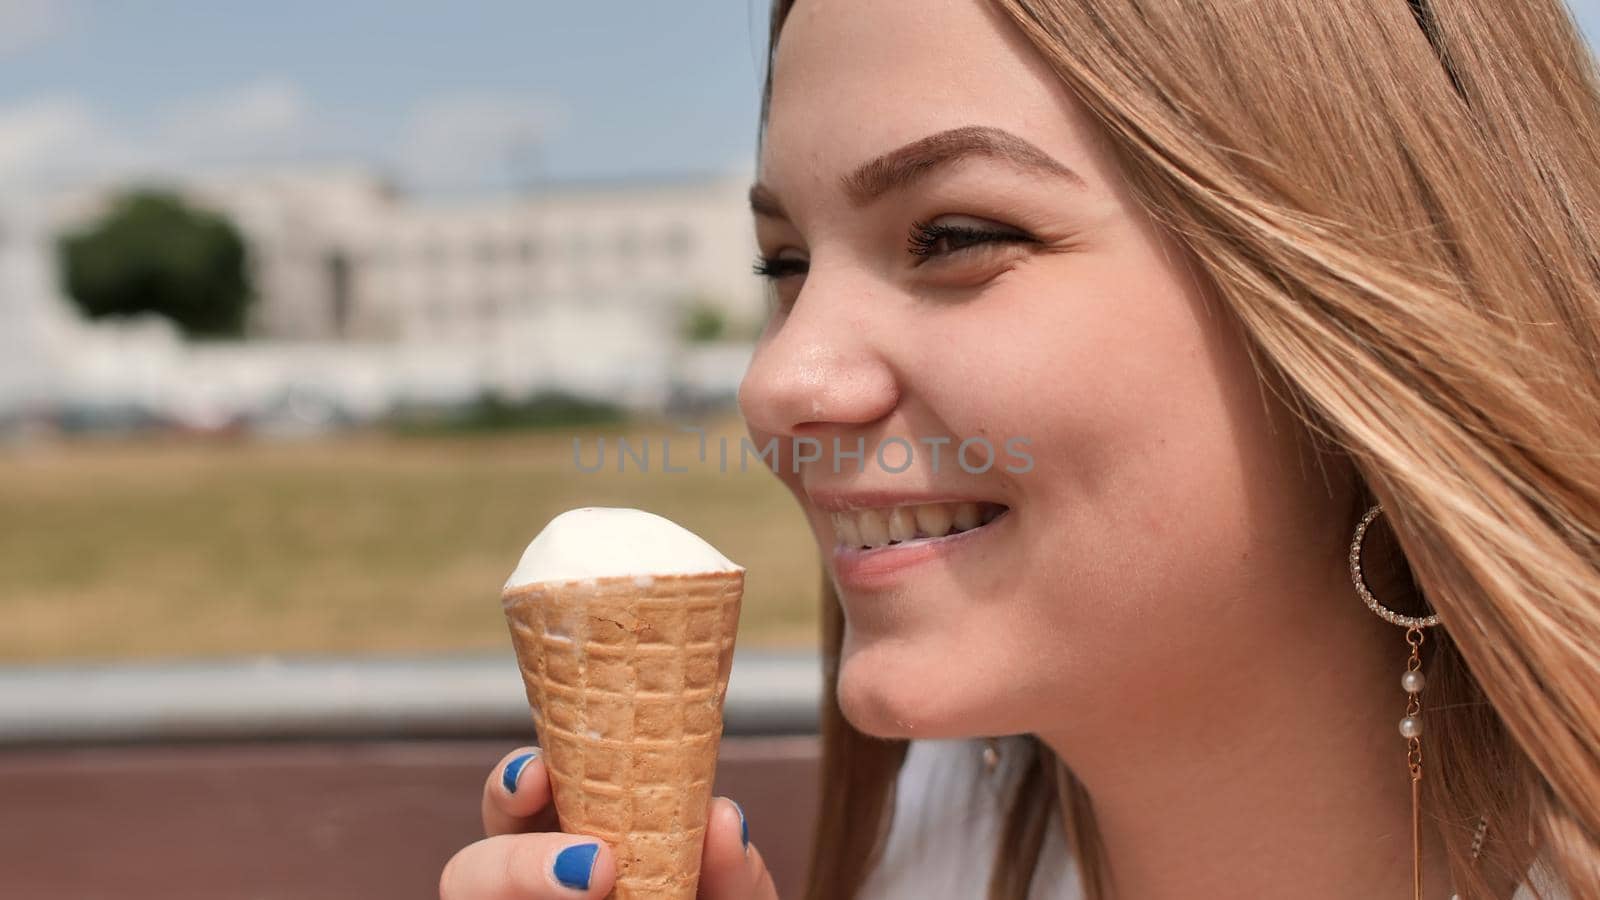 The girl eats an ice cream cone on the street of the city. by DovidPro